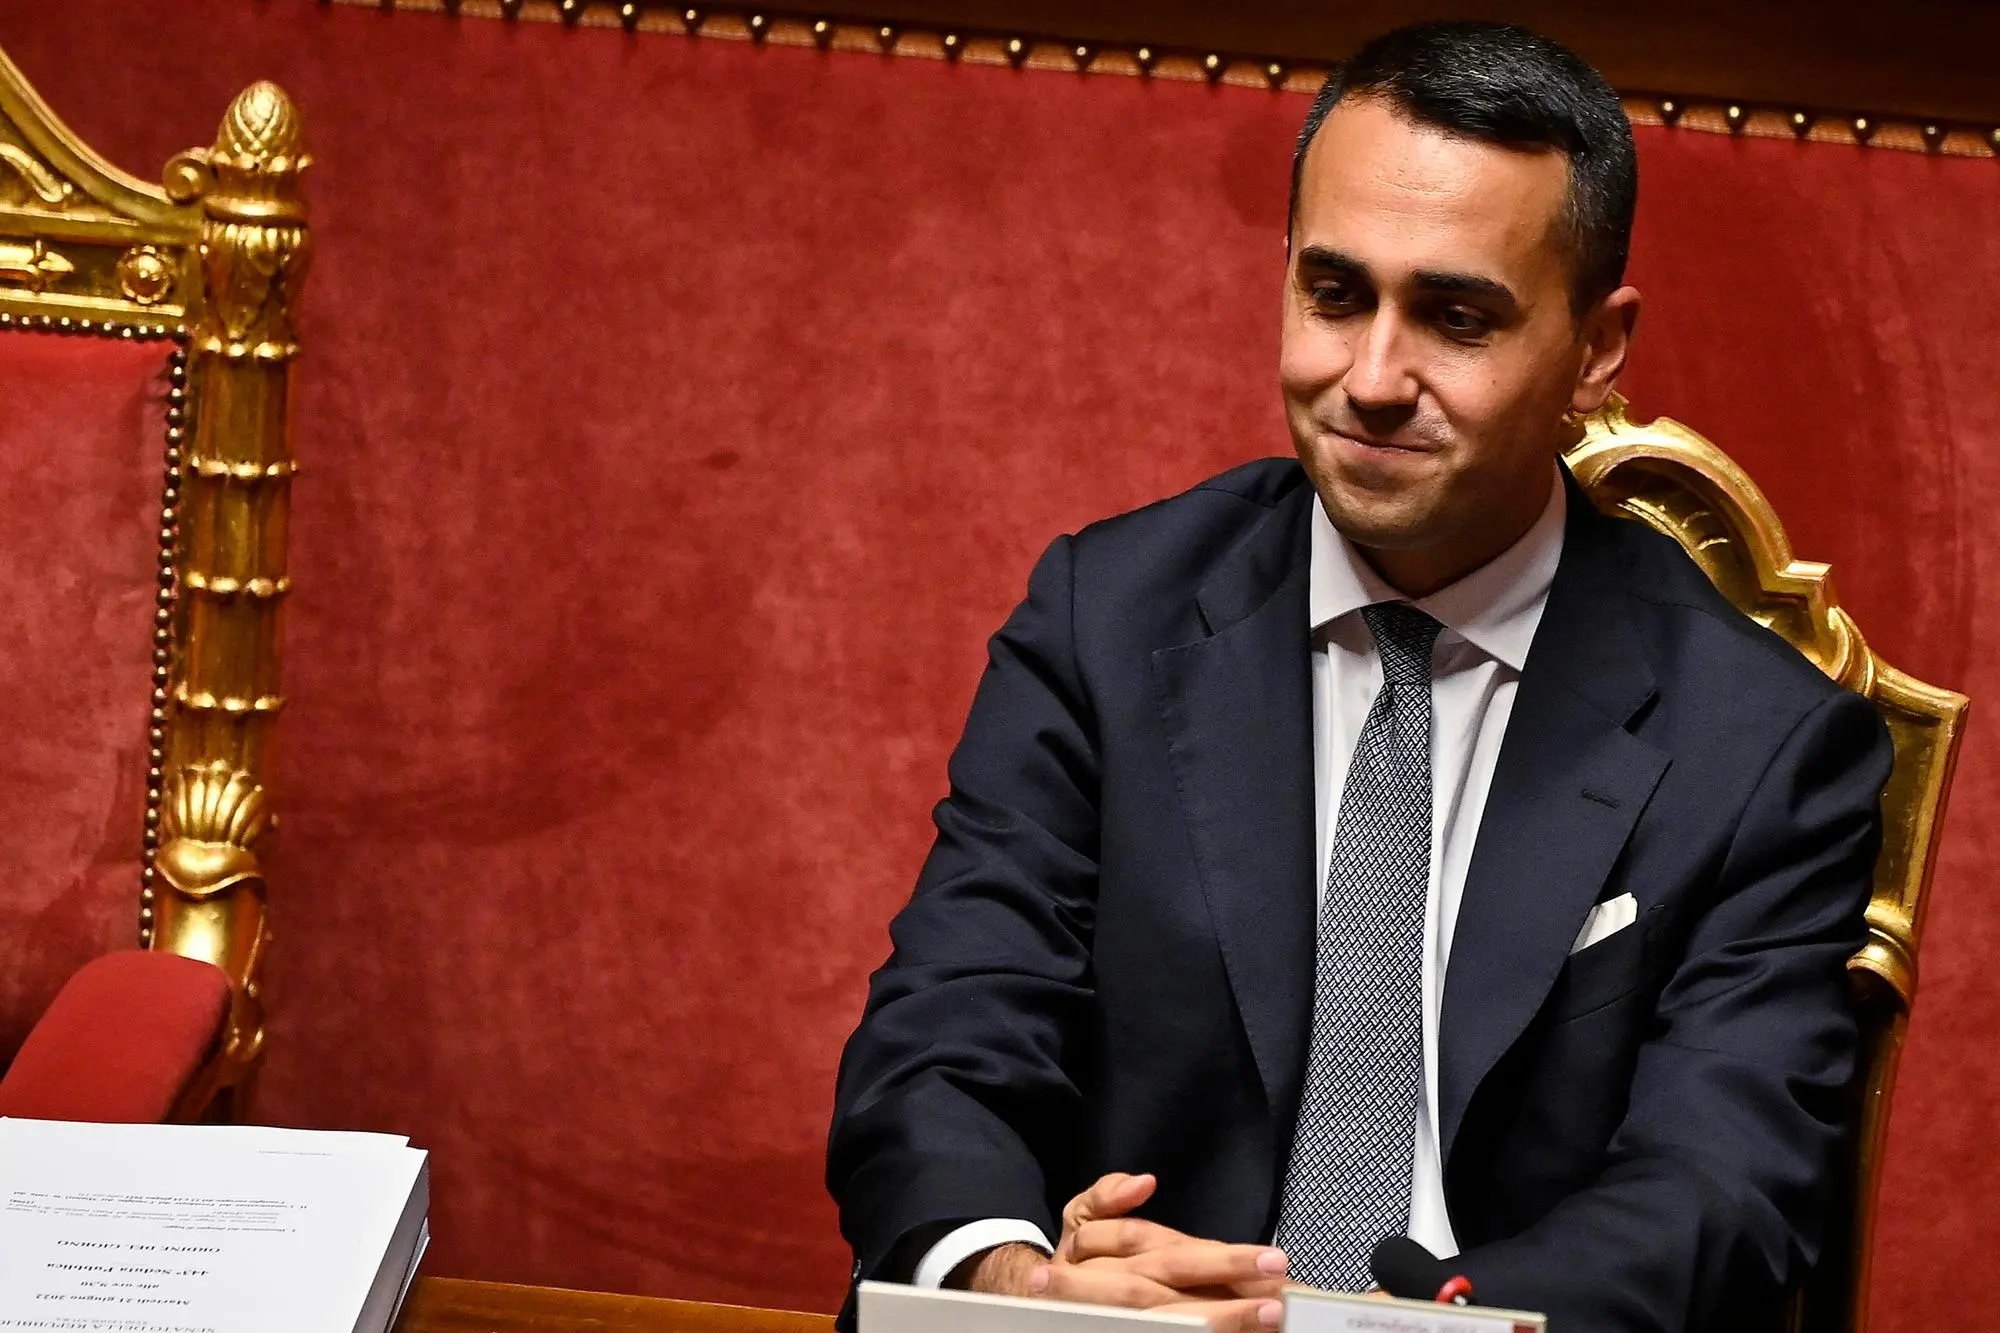 Italian Minister of Foreign Affairs, Luigi Di Maio, in the hall of Palazzo Madama as Prime Minister Mario Draghi delivers a speech at the Senate, ahead to the upcoming European Council meeting scheduled for 23-24 June, Rome, Italy, 21 June 2022. ANSA/RICCARDO ANTIMIANI